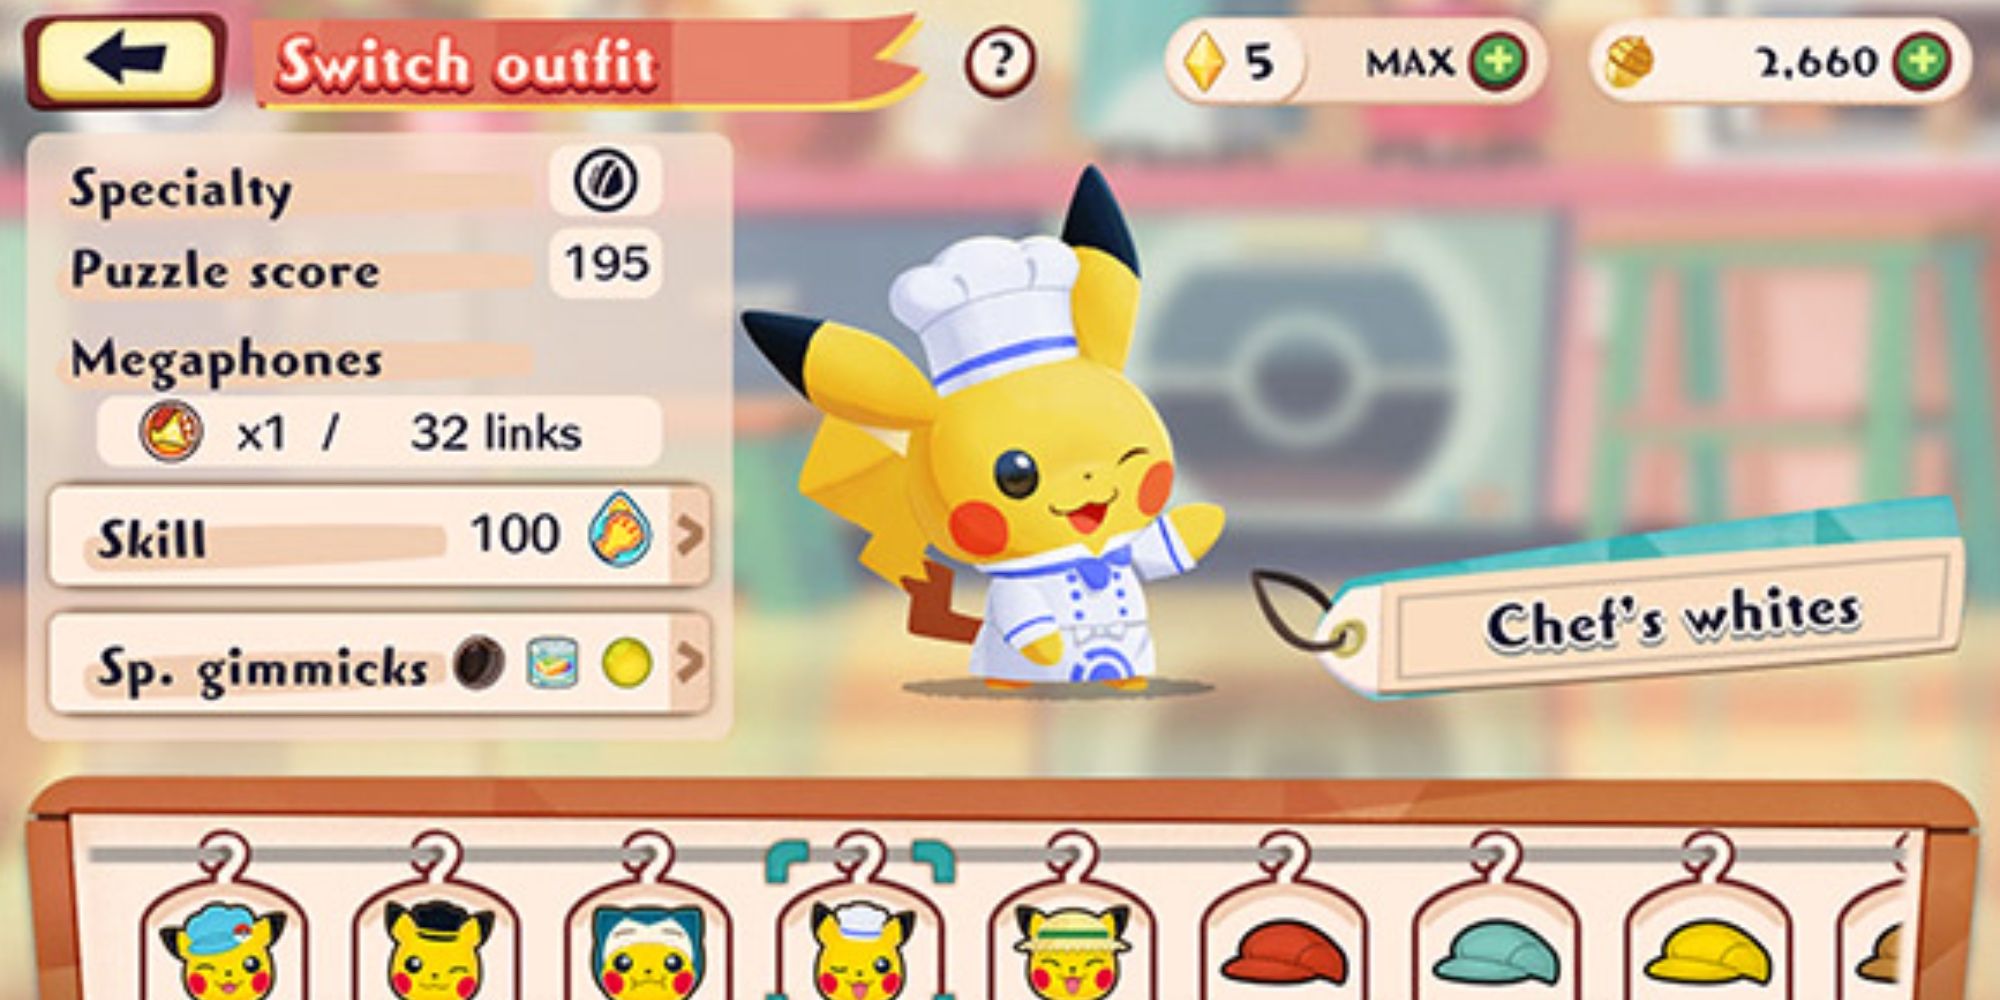 Player prepares a dish using fresh ingredients with Pikachu